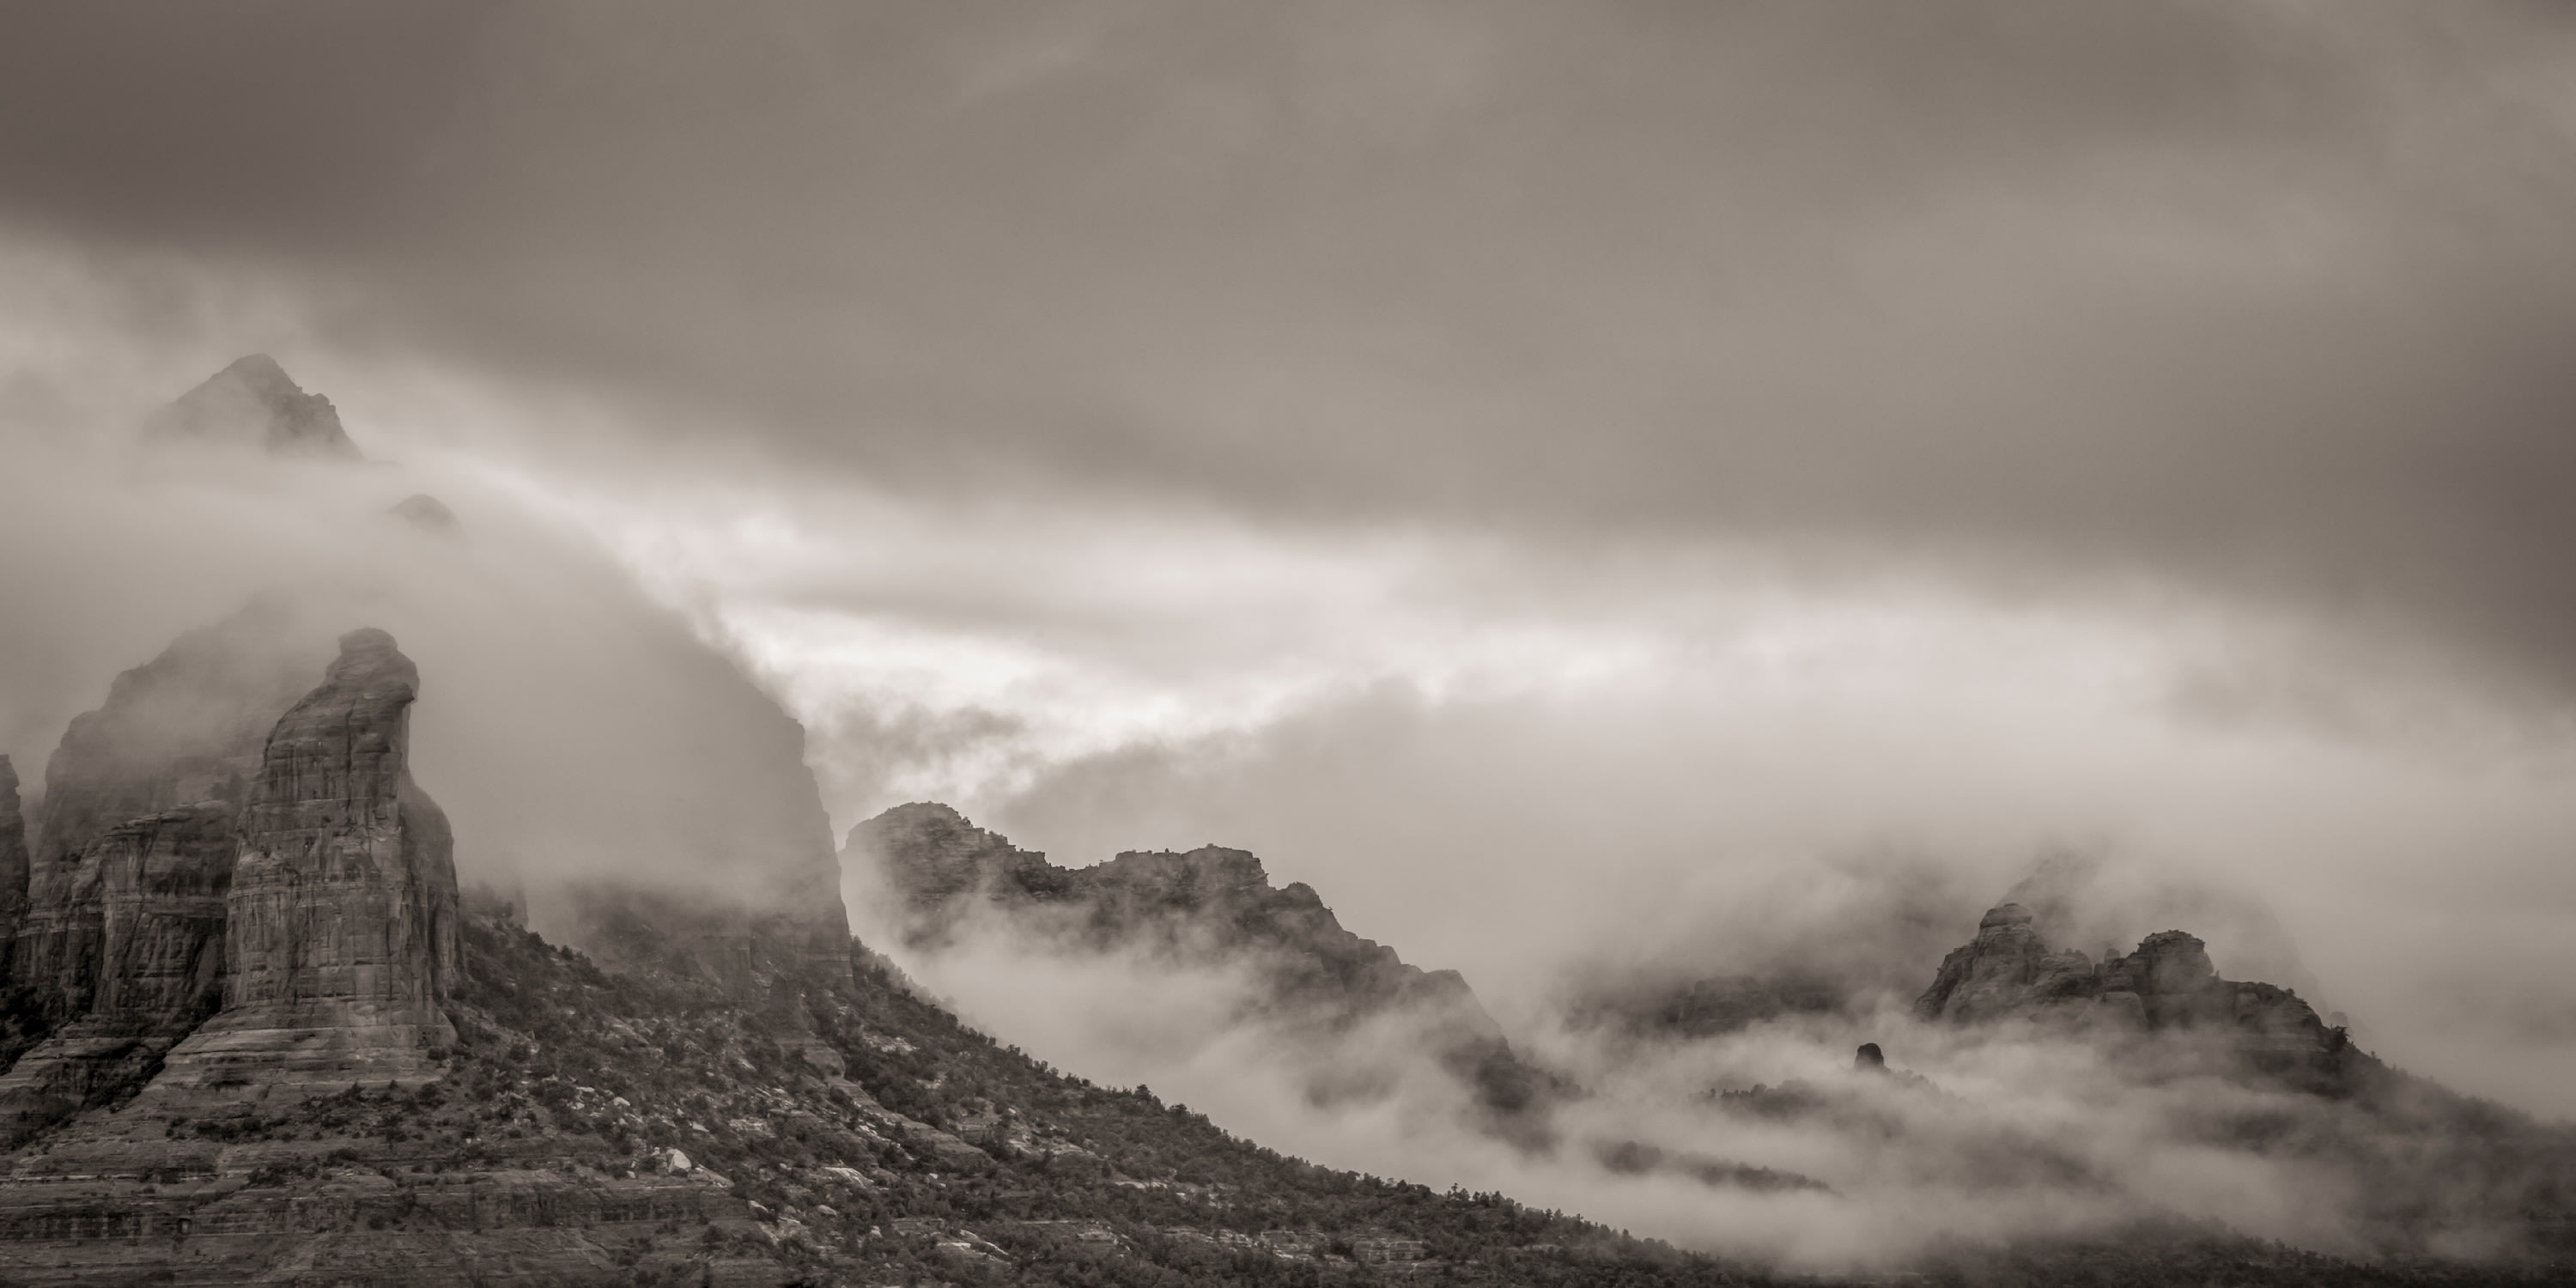 
        <div class='title'>
          Misty Morning, Sedona a panoramic wall art piece of low clouds covering mountains in Sedona, Arizona in black and white.
        </div>
       
        <div class='description'>
          
        </div>
      